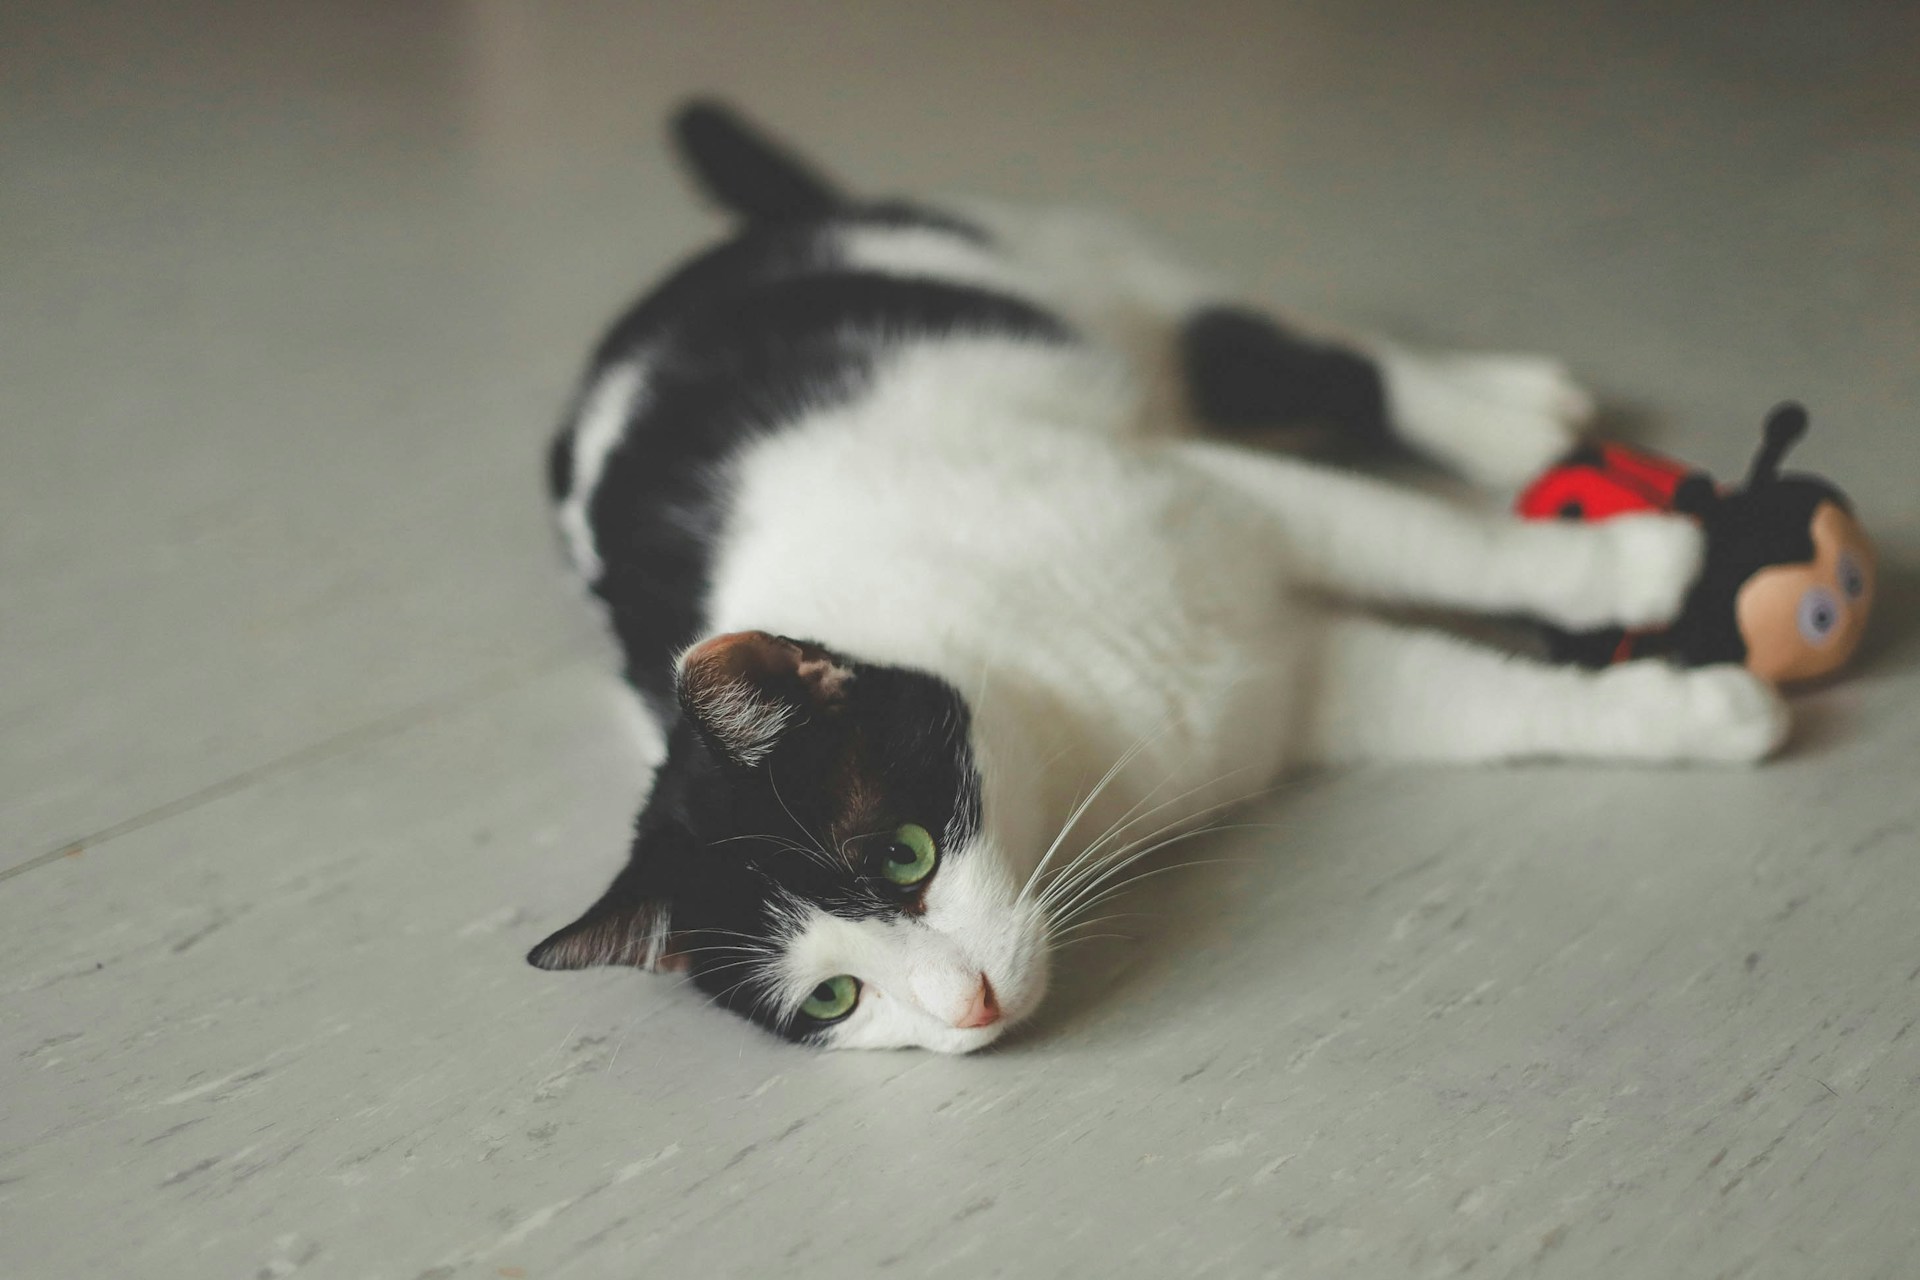 A sick cat lying on the floor with a toy